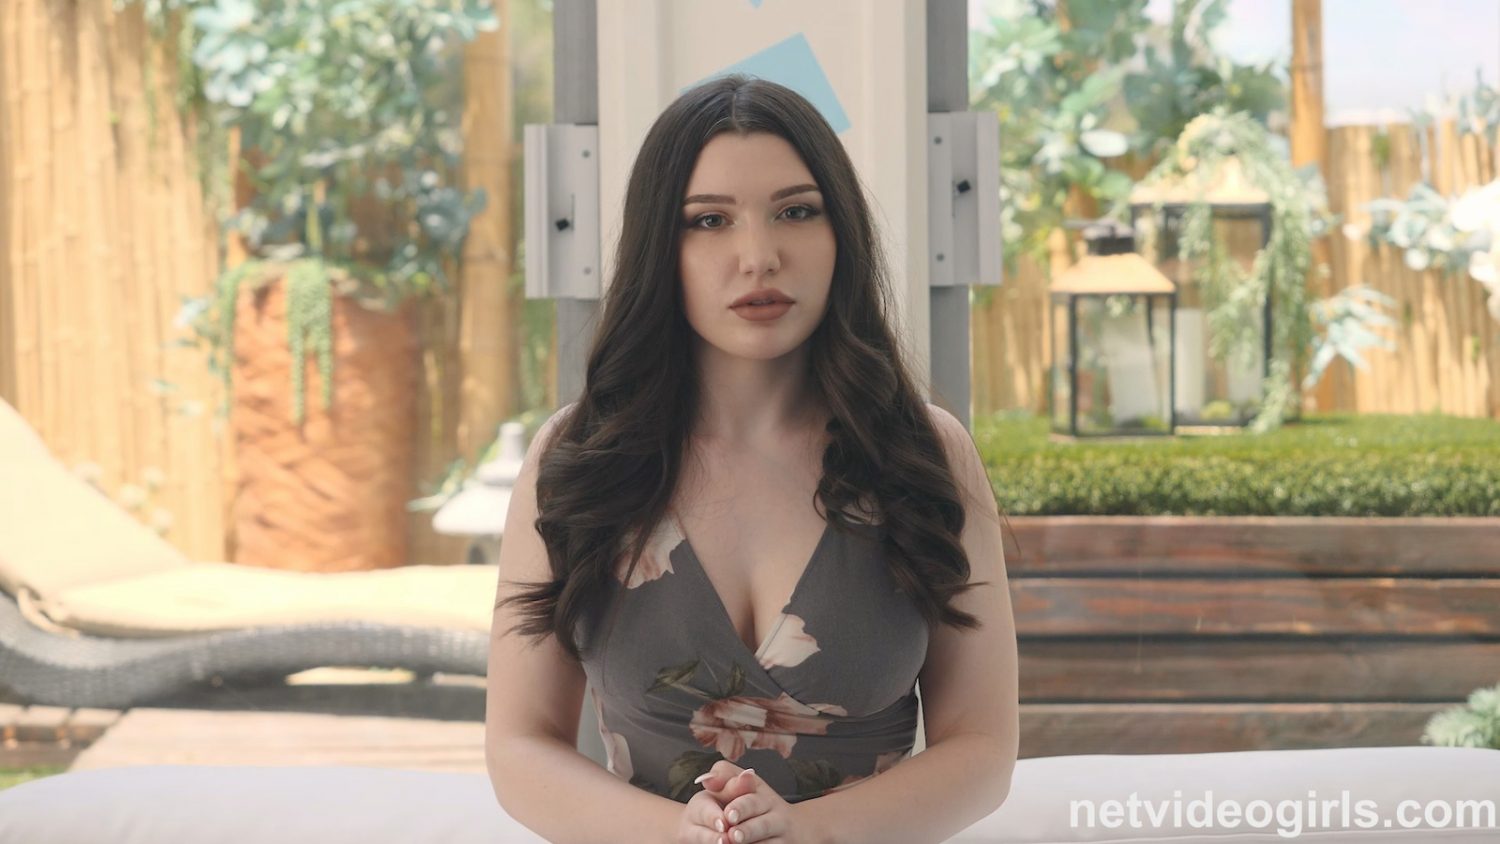 Lily Married and Busty Net Video Girls